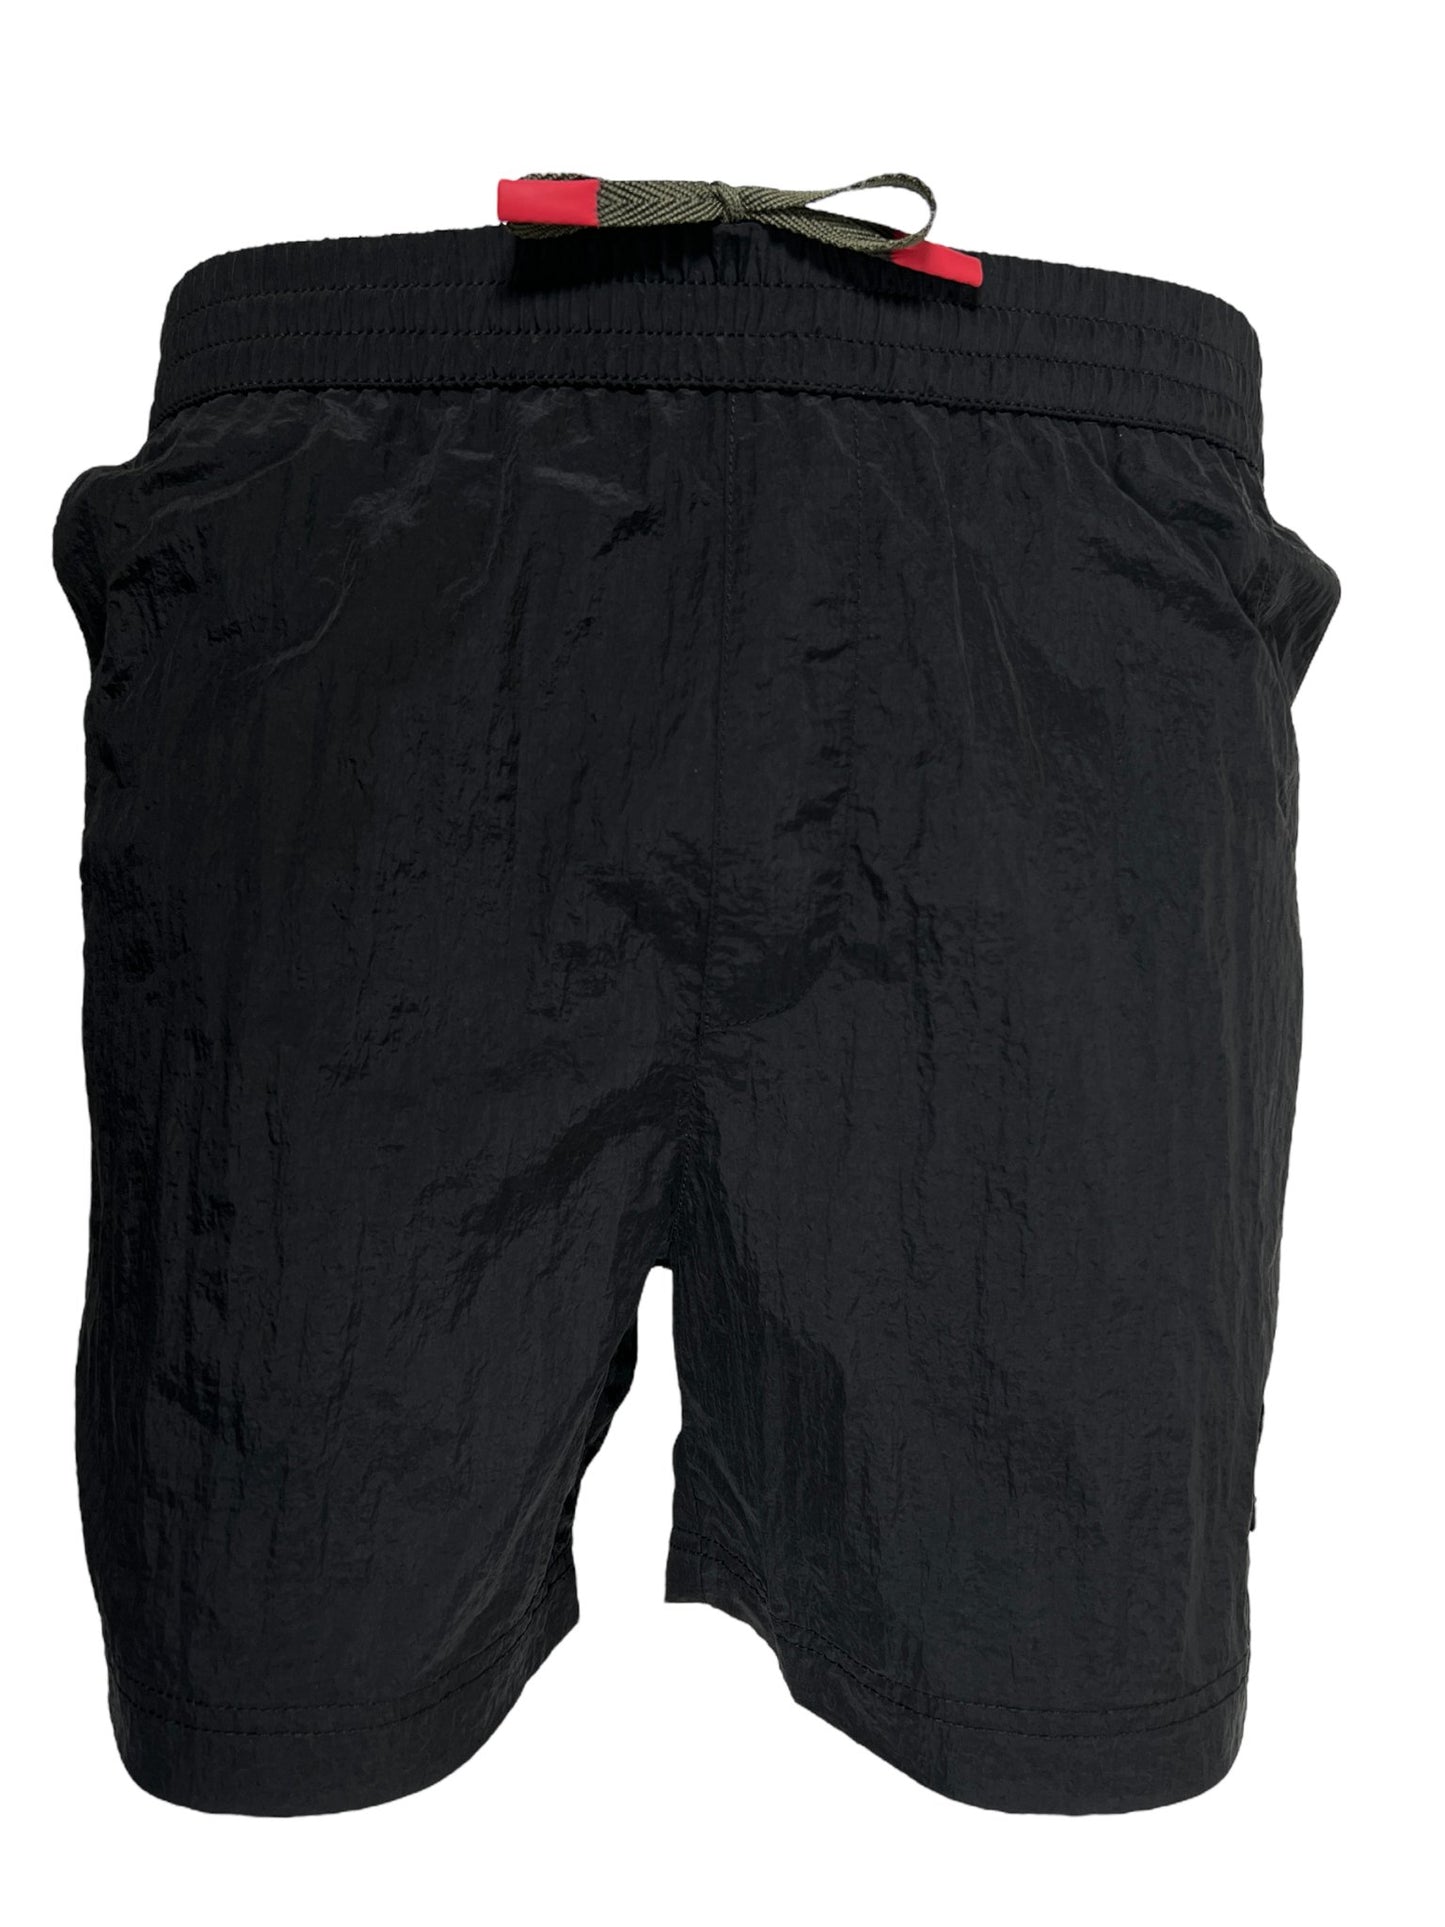 DIESEL men's board shorts with a red and green drawstring, isolated on a white background.